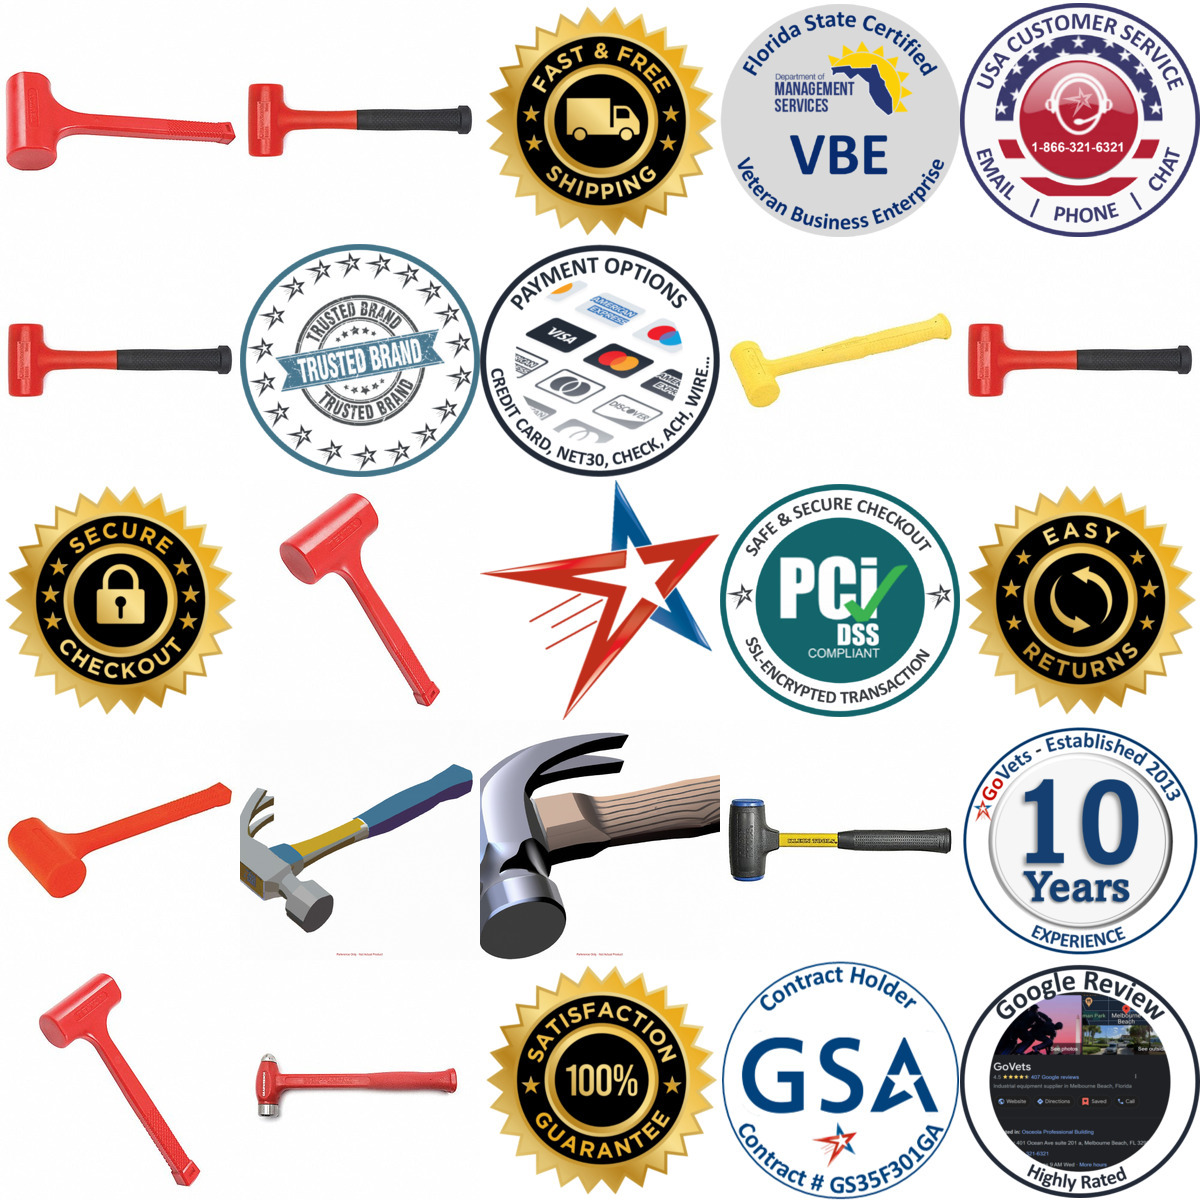 A selection of Dead Blow Hammers products on GoVets